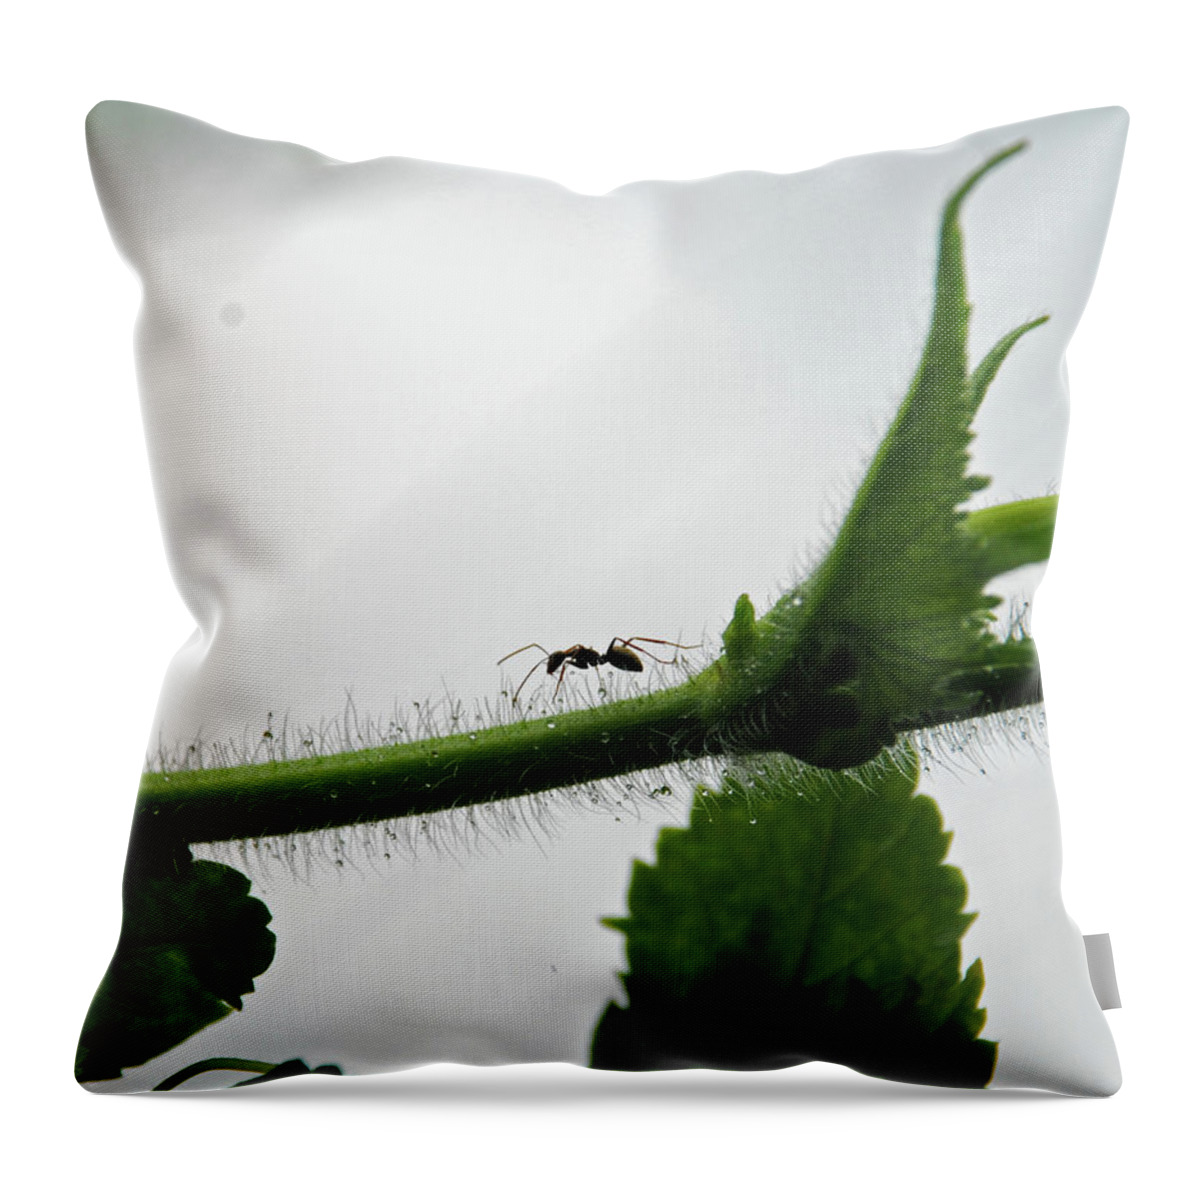 Insect Throw Pillow featuring the photograph A Bugs Life by Gopan G Nair